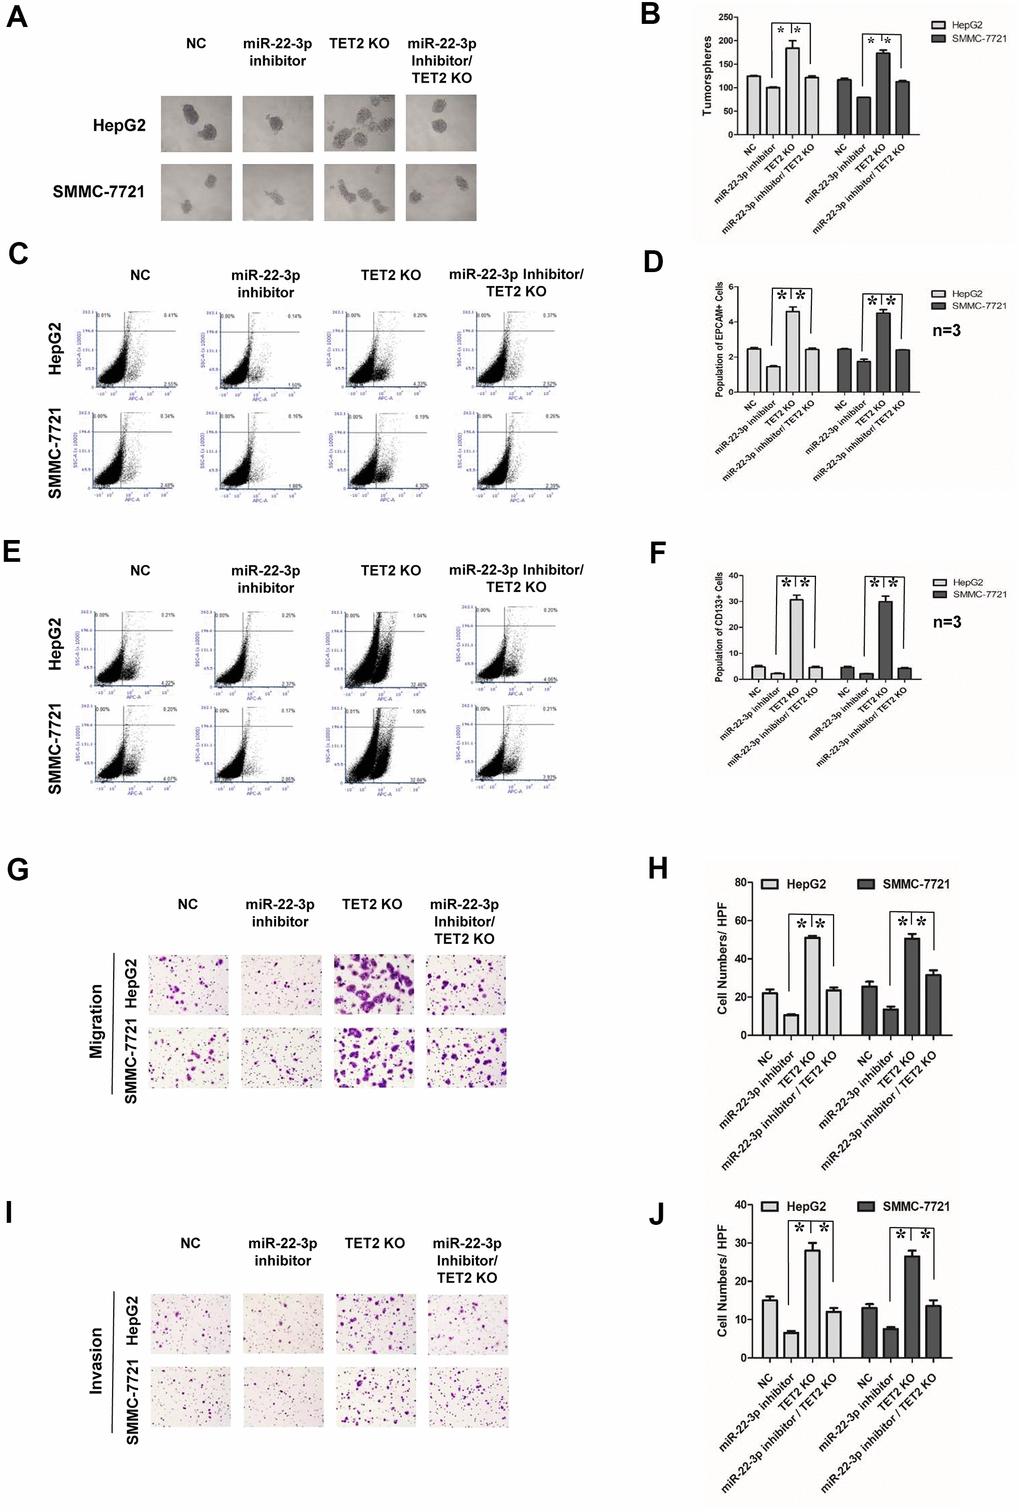 Effects of miR-22-3p and TET2 on stemness and metastasis of HCC cells. (A) Tumorspheres formation ability of HCC cells in negative-control, miR-22-3p inhibitor, TET2 KO and miR-22-3p inhibitor/TET2 KO groups. (B) The tumorspheres were quantified. *PC, D) Population of EPCAM-positive HCC cells in negative-control, miR-22-3p inhibitor, TET2 KO and miR-22-3p inhibitor/TET2 KO groups. *PE, F) Population of CD133- positive HCC cells in negative-control, miR-22-3p inhibitor, TET2 KO and miR-22-3p inhibitor/TET2 KO groups. *PG) Representative image showing the migration of HCC cells in control, negative-control, miR-22-3p inhibitor, TET2 KO and miR-22-3p inhibitor/TET2 KO groups. (H) The migrated cells were quantified as described in the Materials and Methods. *PI) Representative image showing the invasion of HCC cells in negative-control, miR-22-3p inhibitor, TET2 KO and miR-22-3p inhibitor/TET2 KO groups. (J) The invaded cells were quantified as described in the Materials and Methods. *P